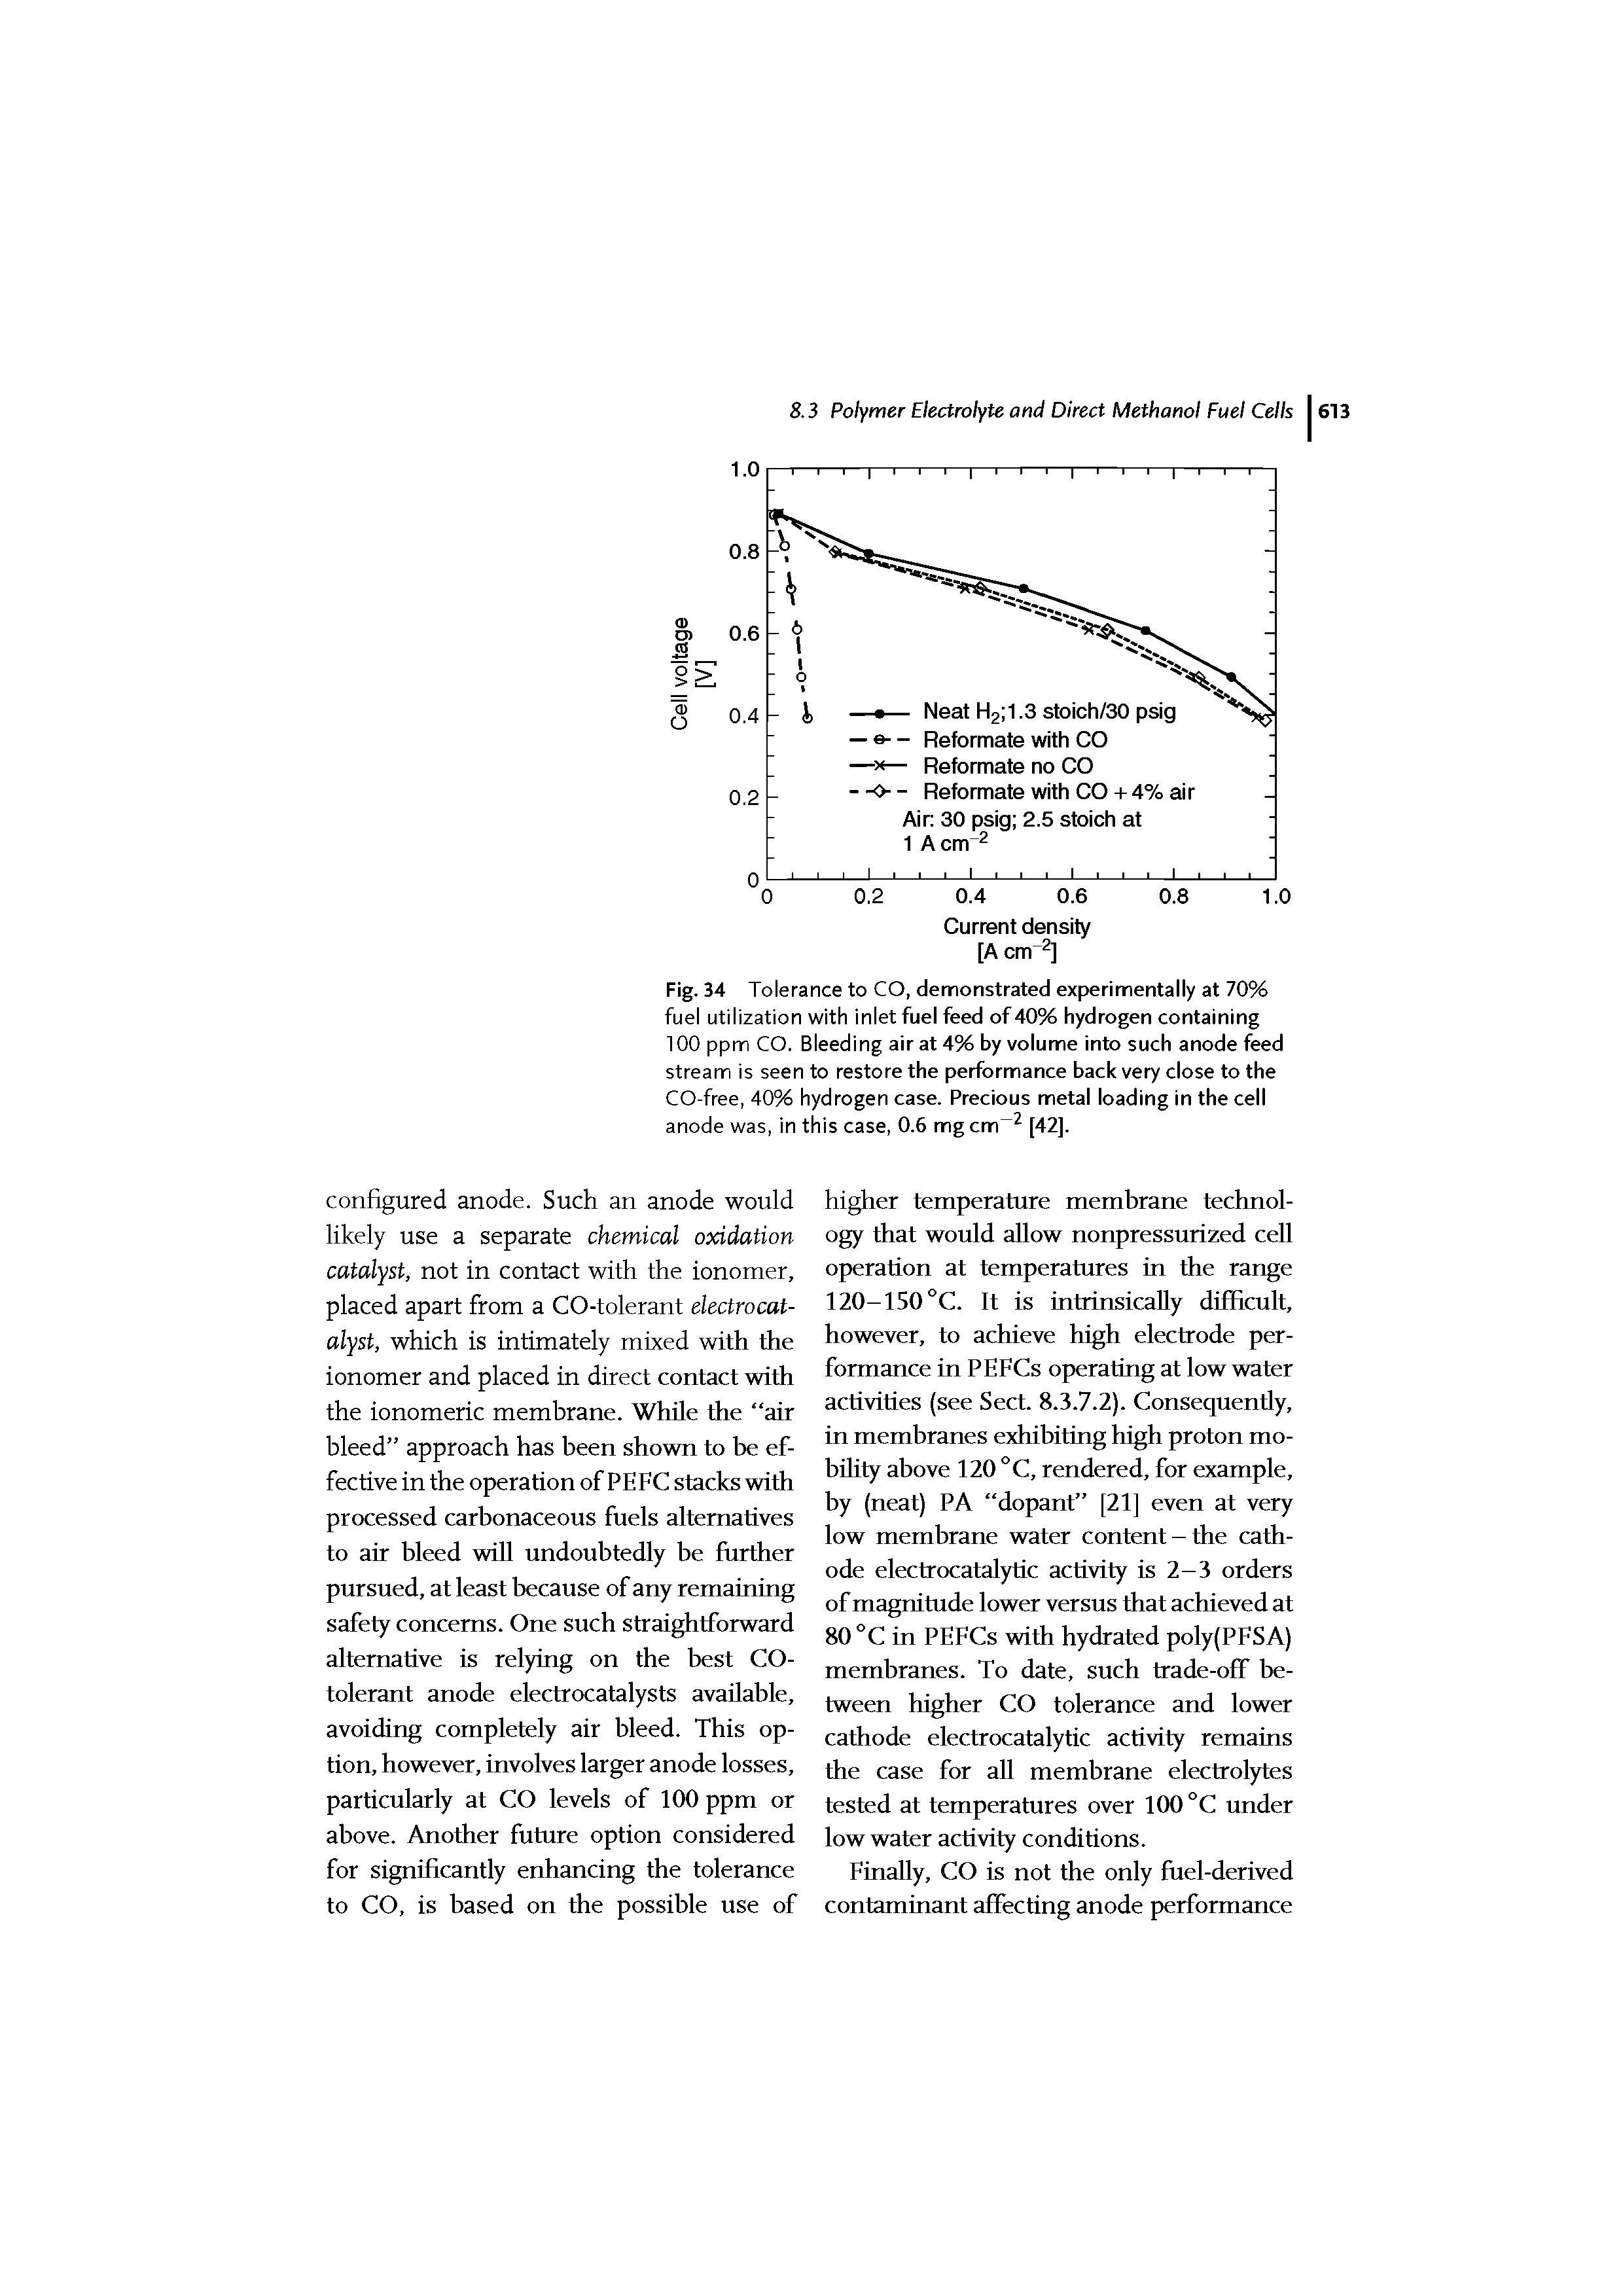 Fig. 34 Tolerance to CO, demonstrated experimentally at 70% fuel utilization with inlet fuel feed of 40% hydrogen containing 100 ppm CO. Bleeding air at 4% by volume into such anode feed stream is seen to restore the performance back very close to the CO-free, 40% hydrogen case. Precious metal loading in the cell anode was, in this case, 0.6 mg cm 2 [42].